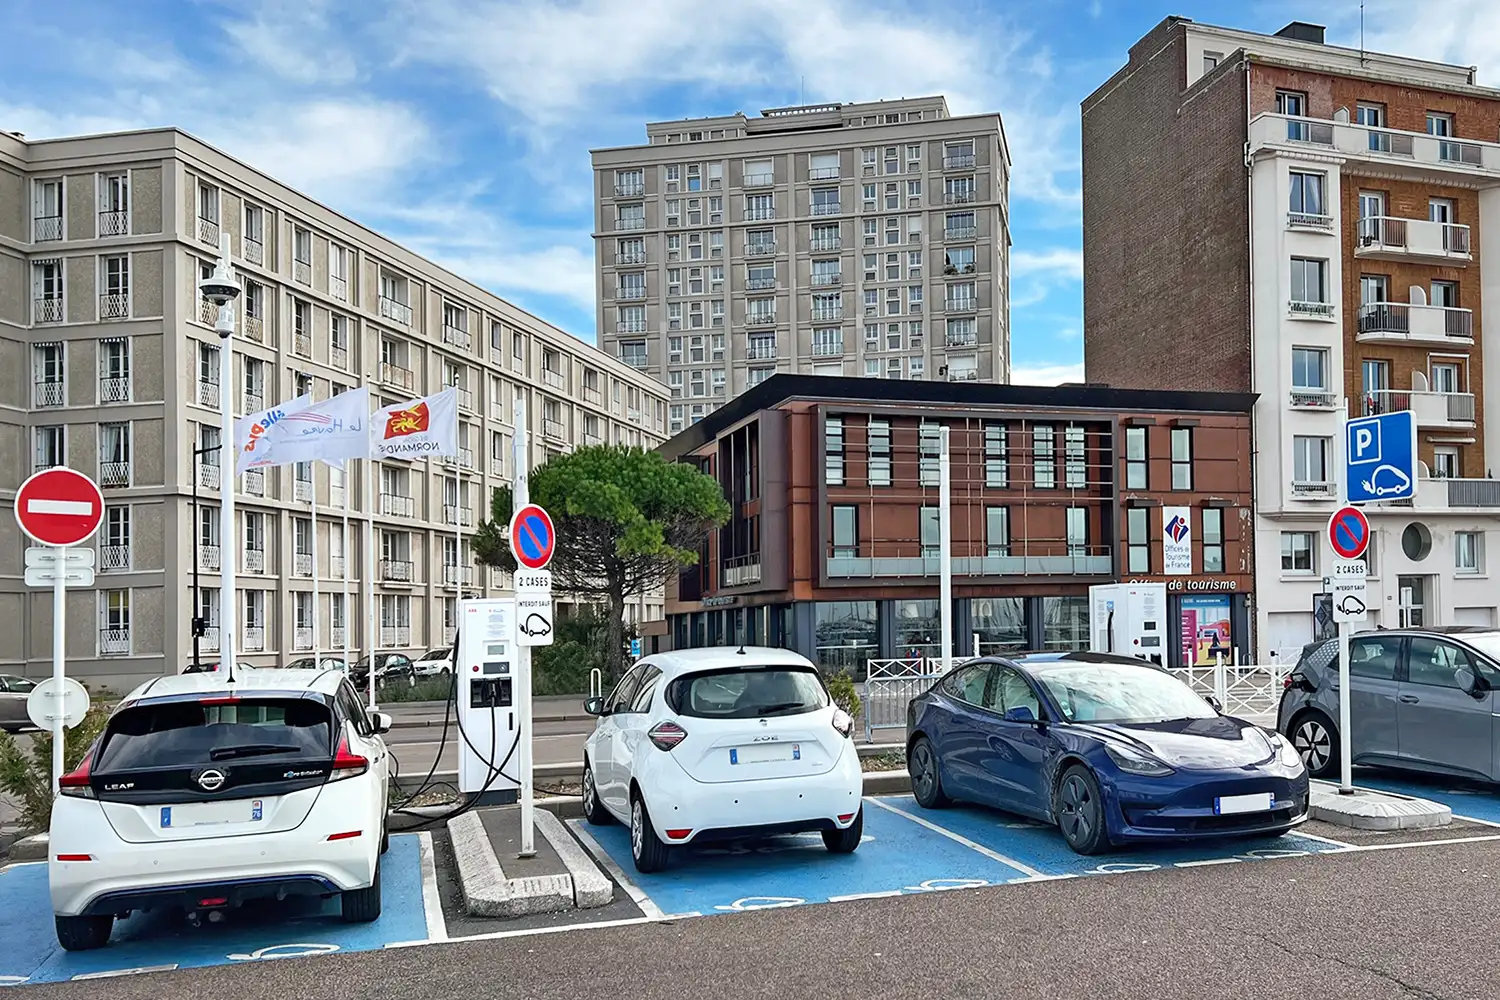 Four EVs are charging at ubitricity / Shell Recharge rapid charge points with charging power of 50, 150, 300 and more kW.